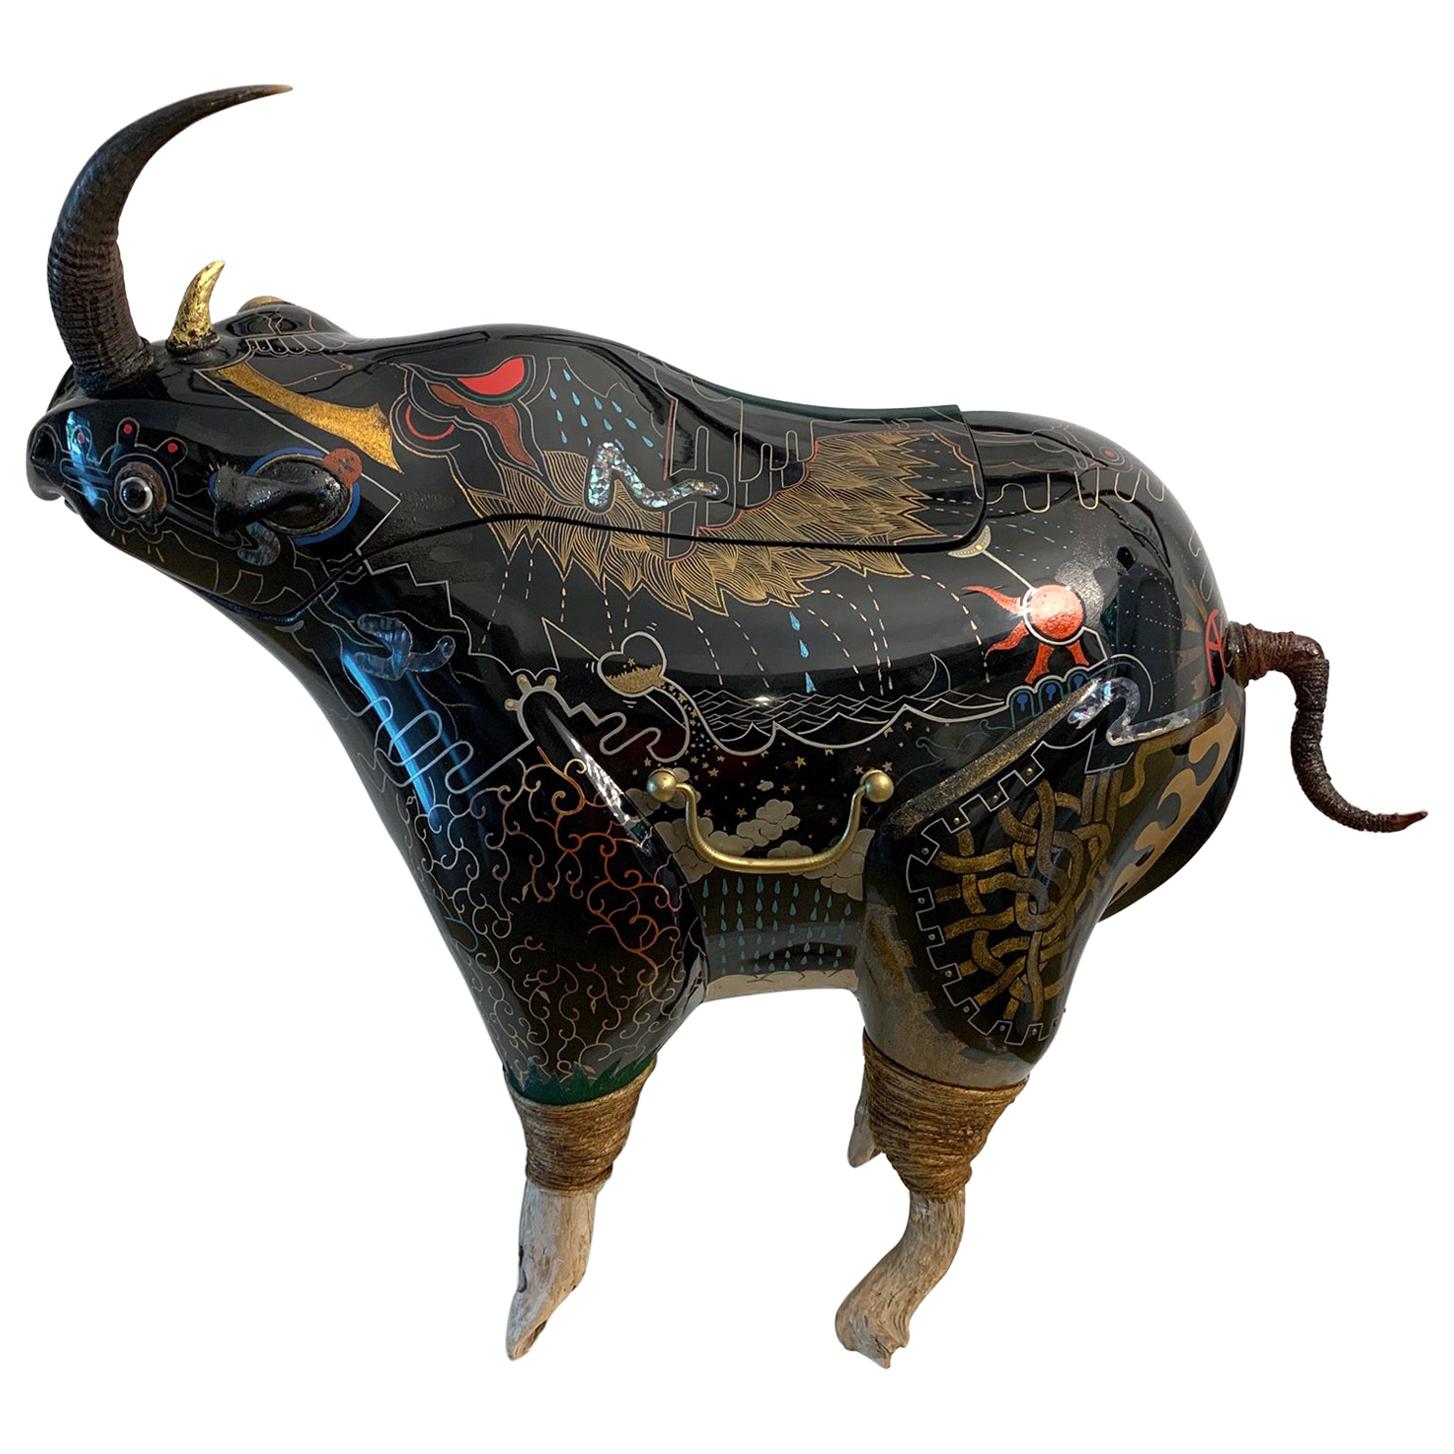 Rhino Contemporary Japanese Lacquer Art by Someya Satoshi For Sale